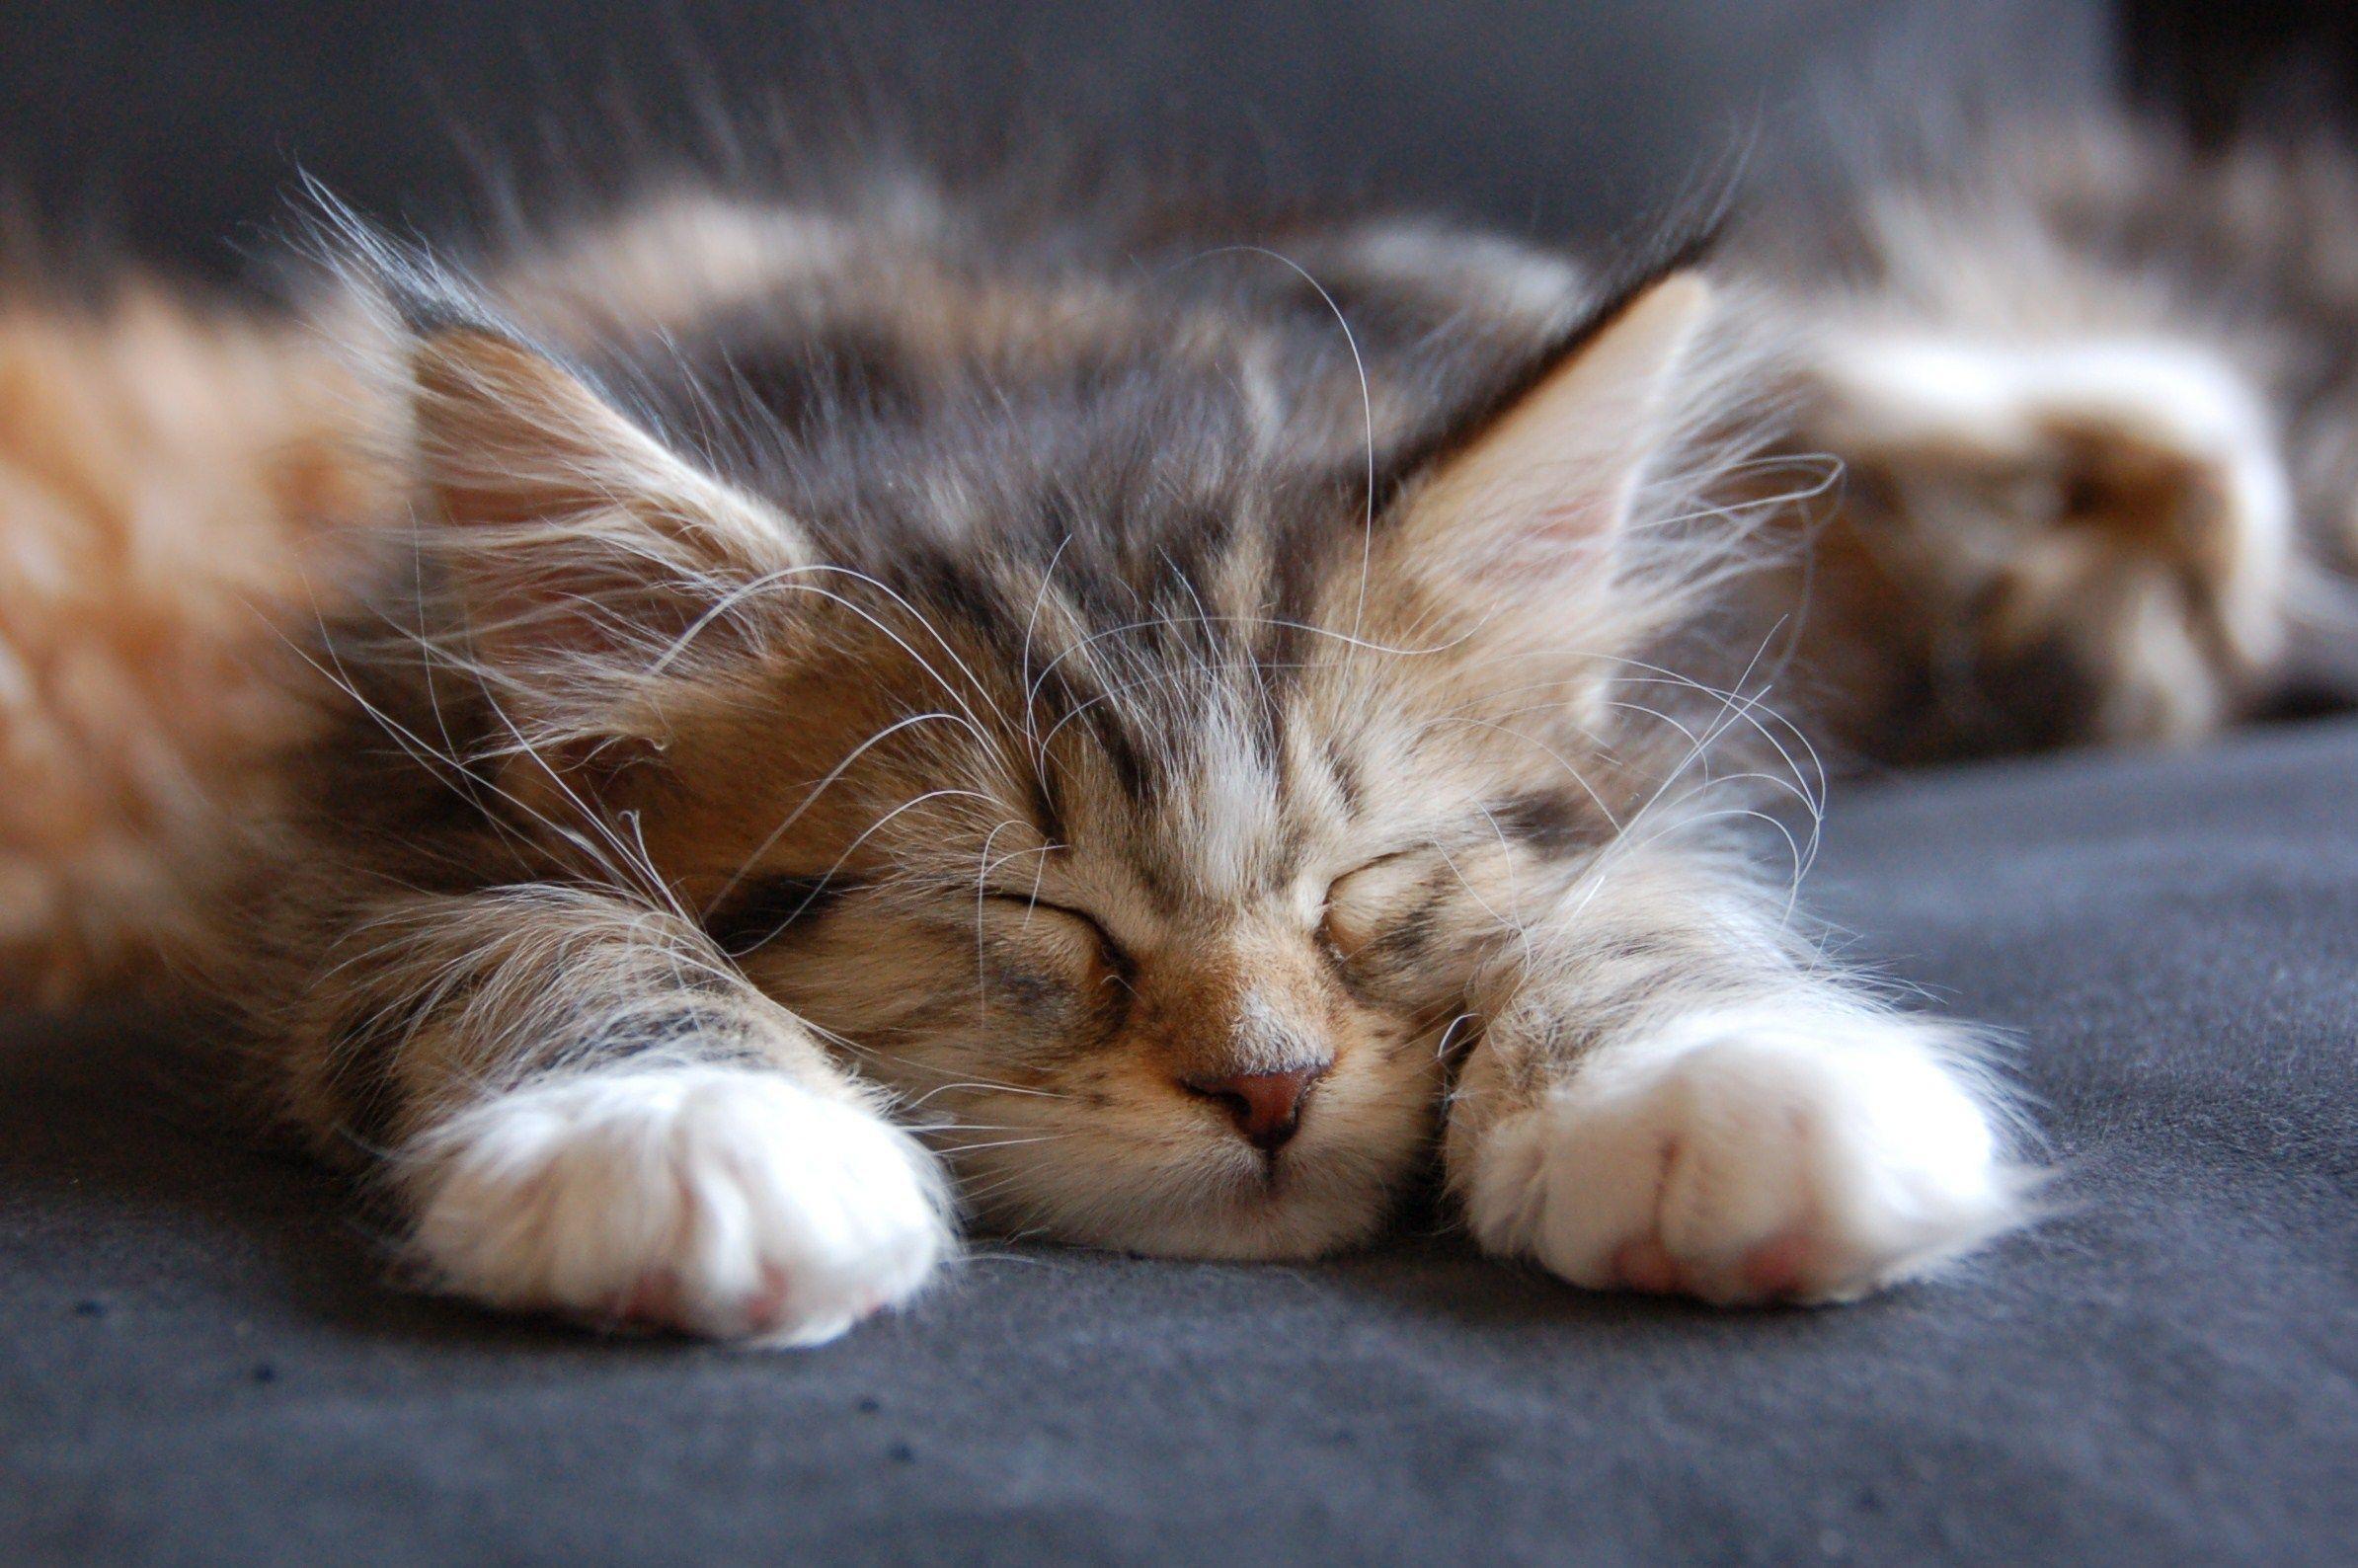 Kid Maine Coon fell asleep wallpaper and image